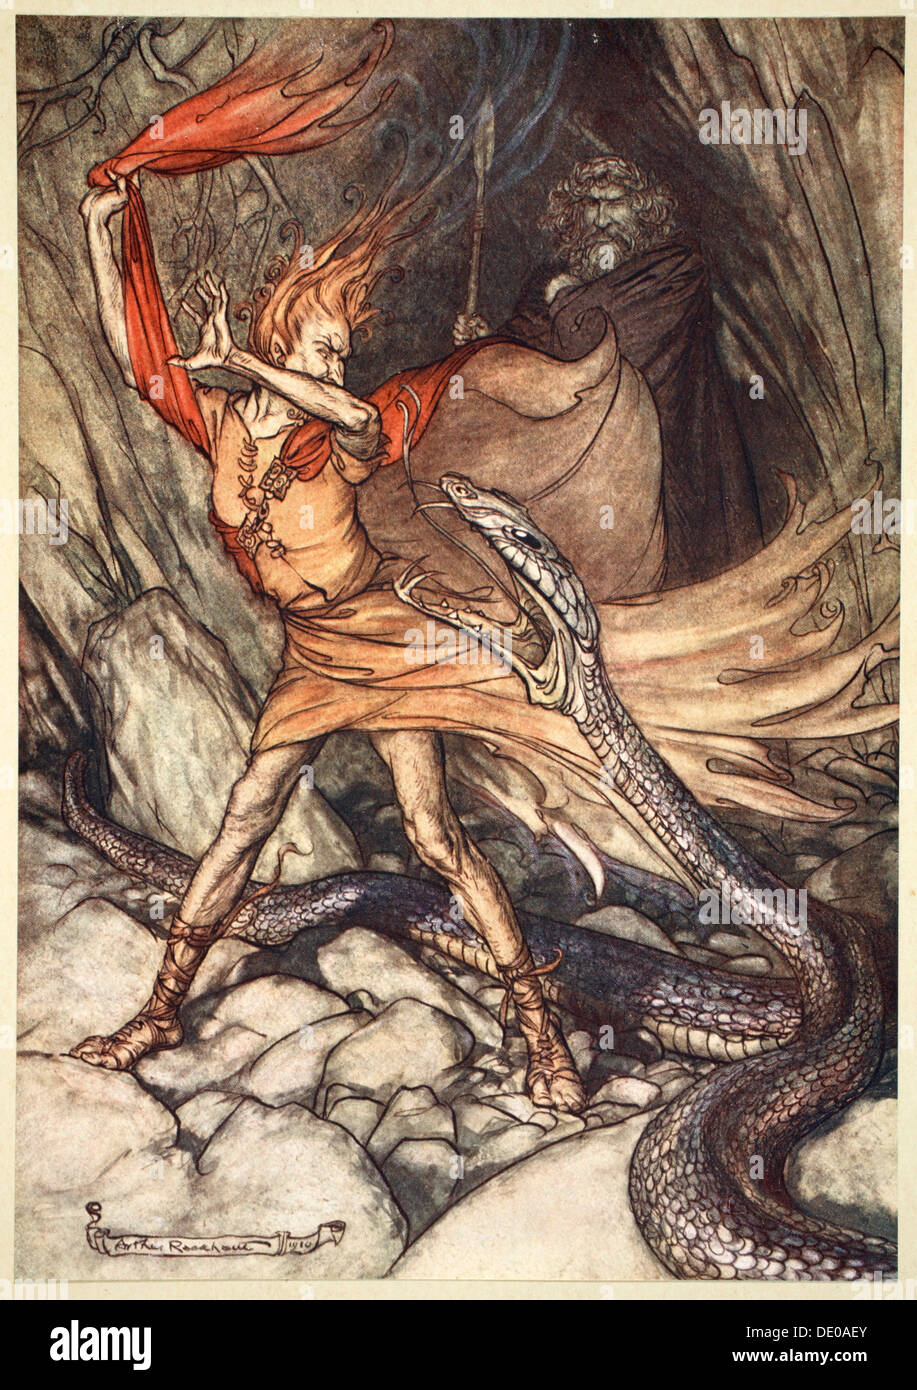 'Ohe! Ohe! Horrible dragon, O swallow me not! Spare the life of poor Loge!', 1910.  Artist: Arthur Rackham Stock Photo